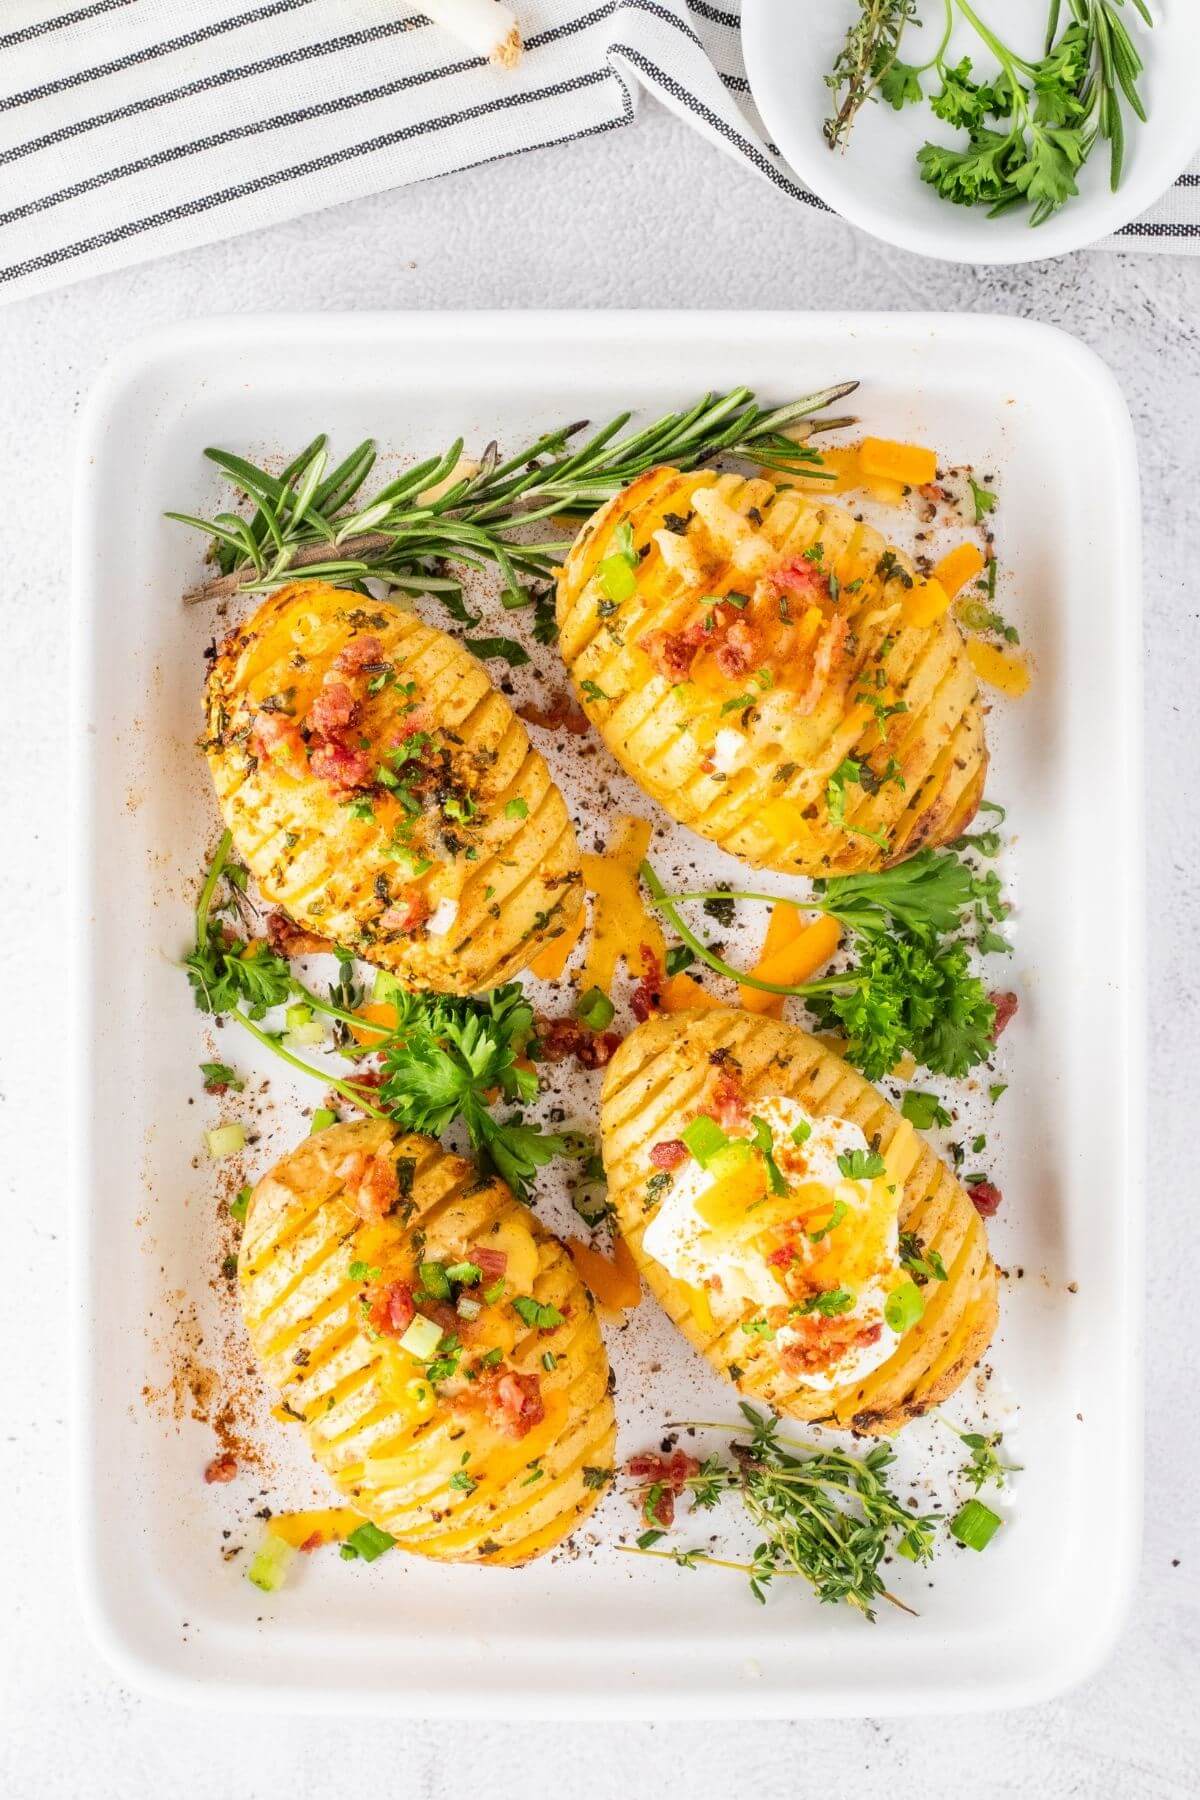 Hasselback potatoes with herbs and butter on a plate.